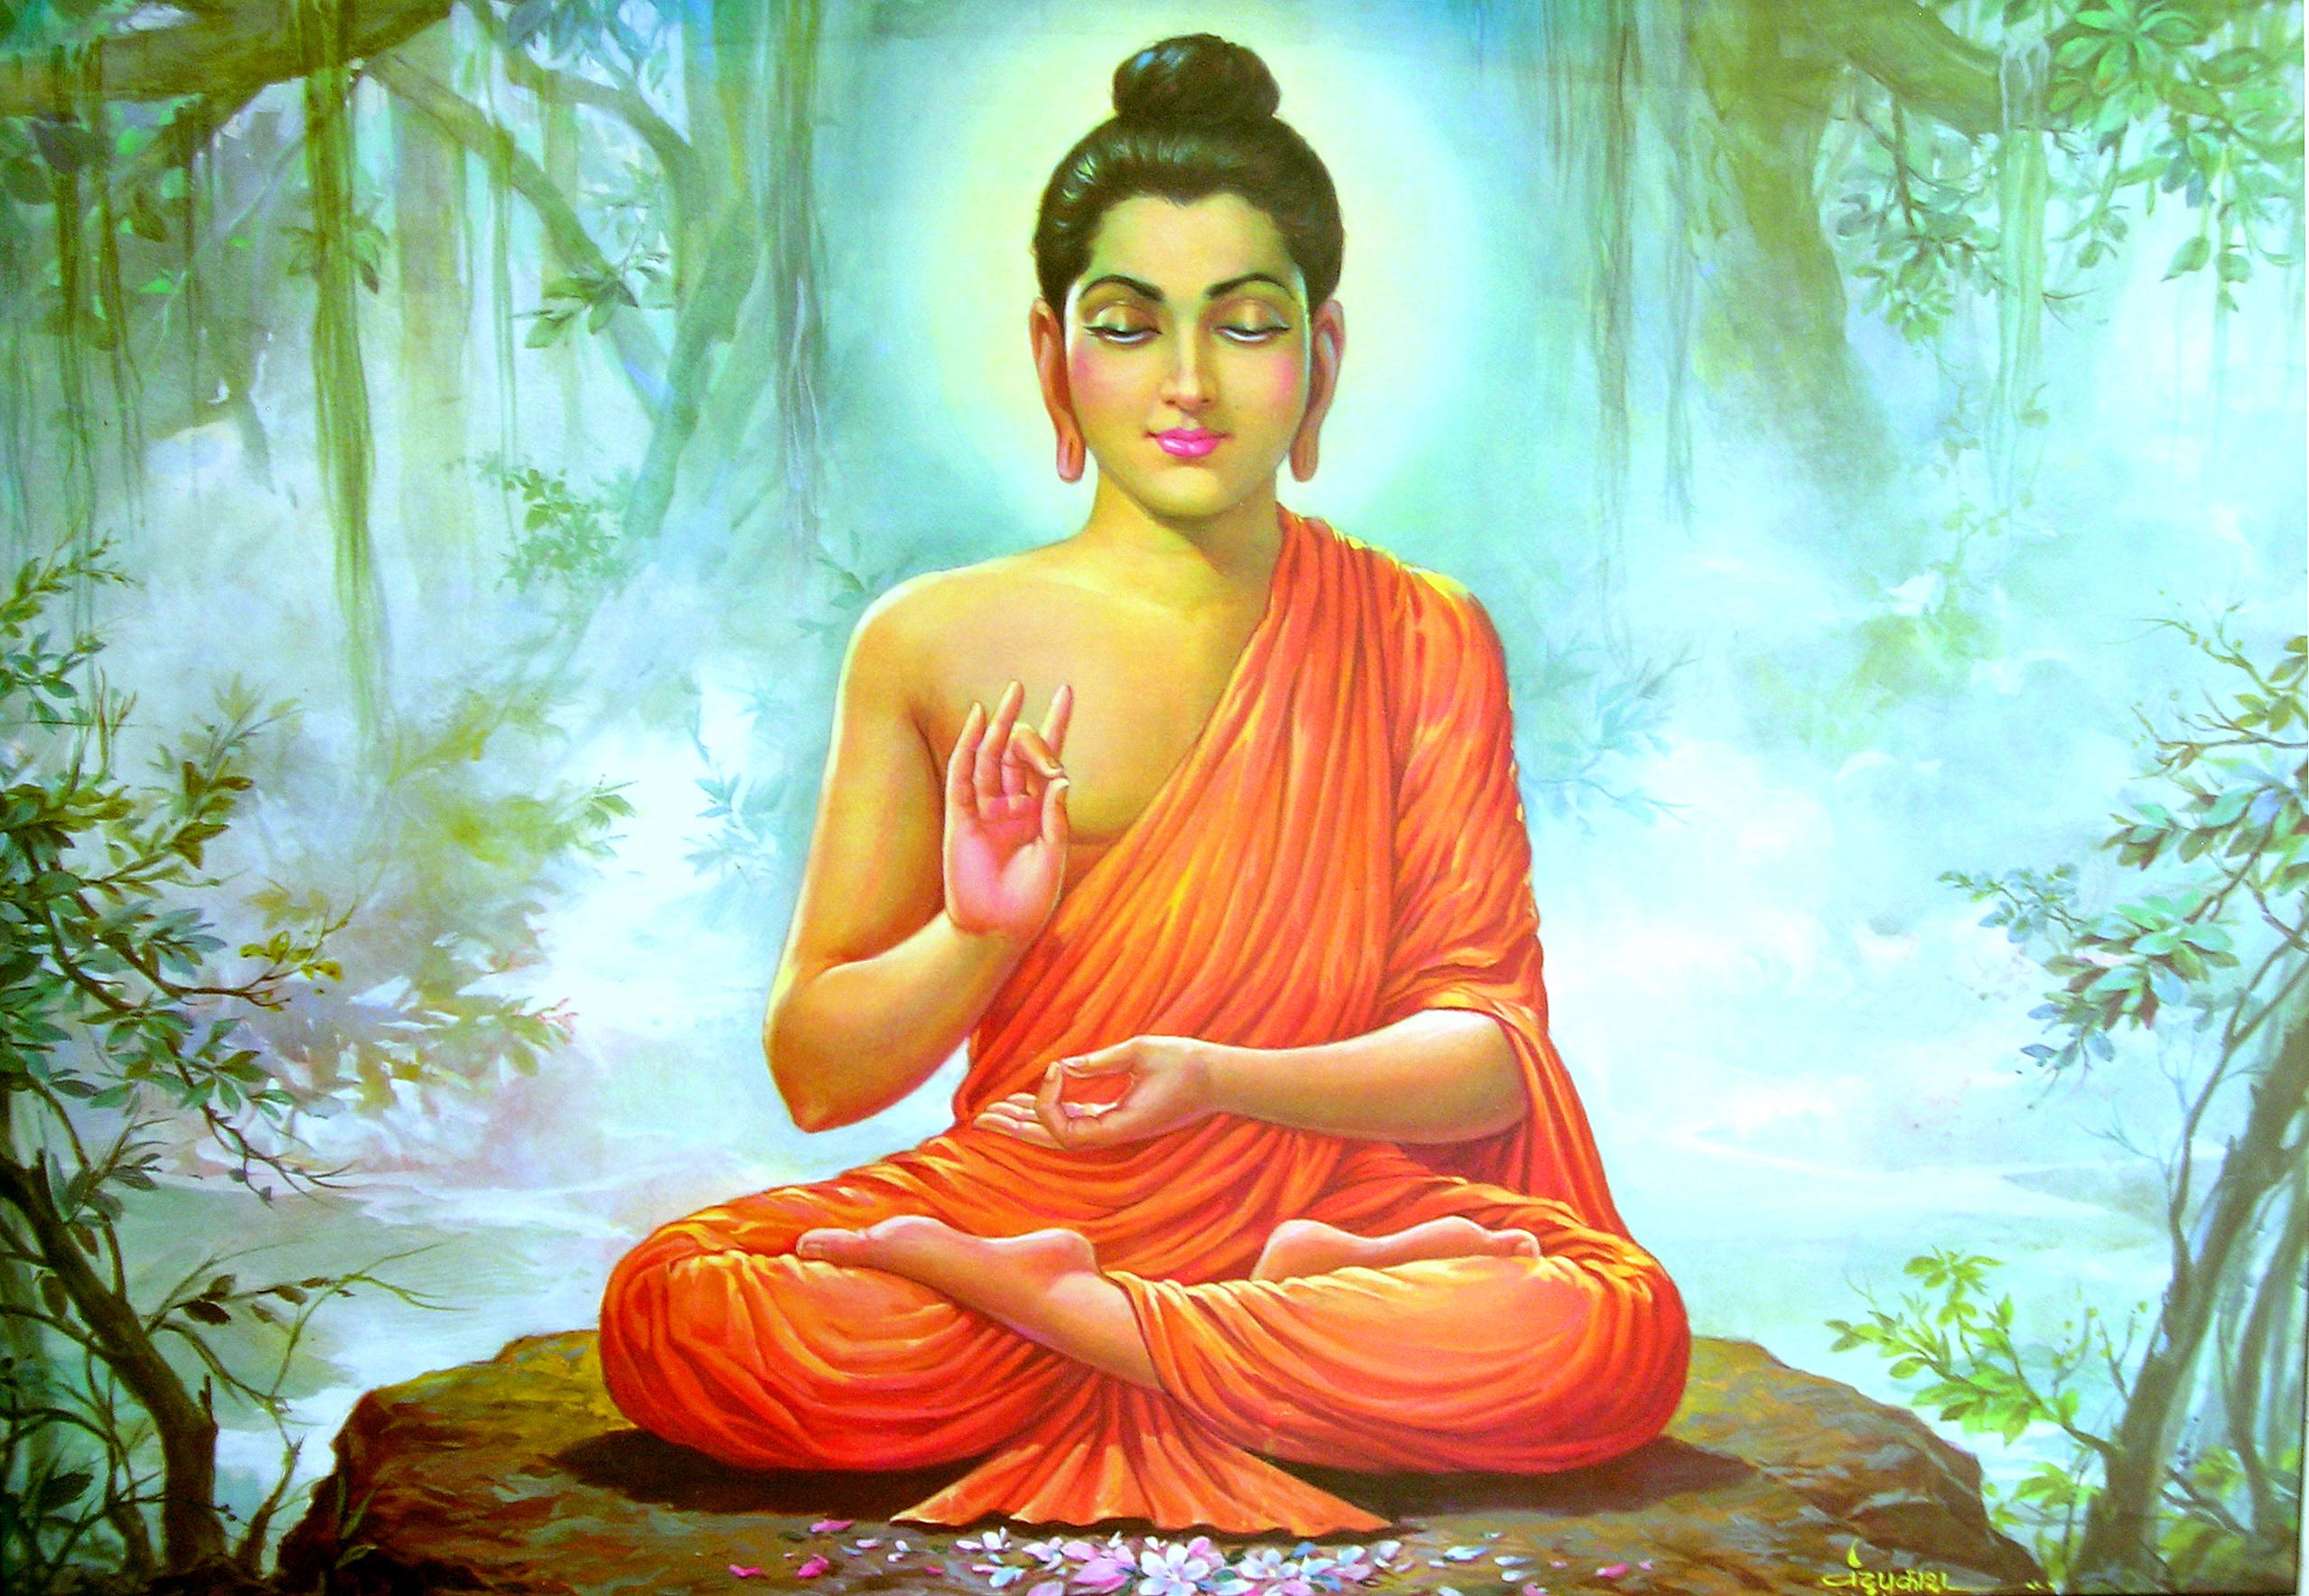 The Buddha - A Documentary Story of the Buddha's Life (Video ...